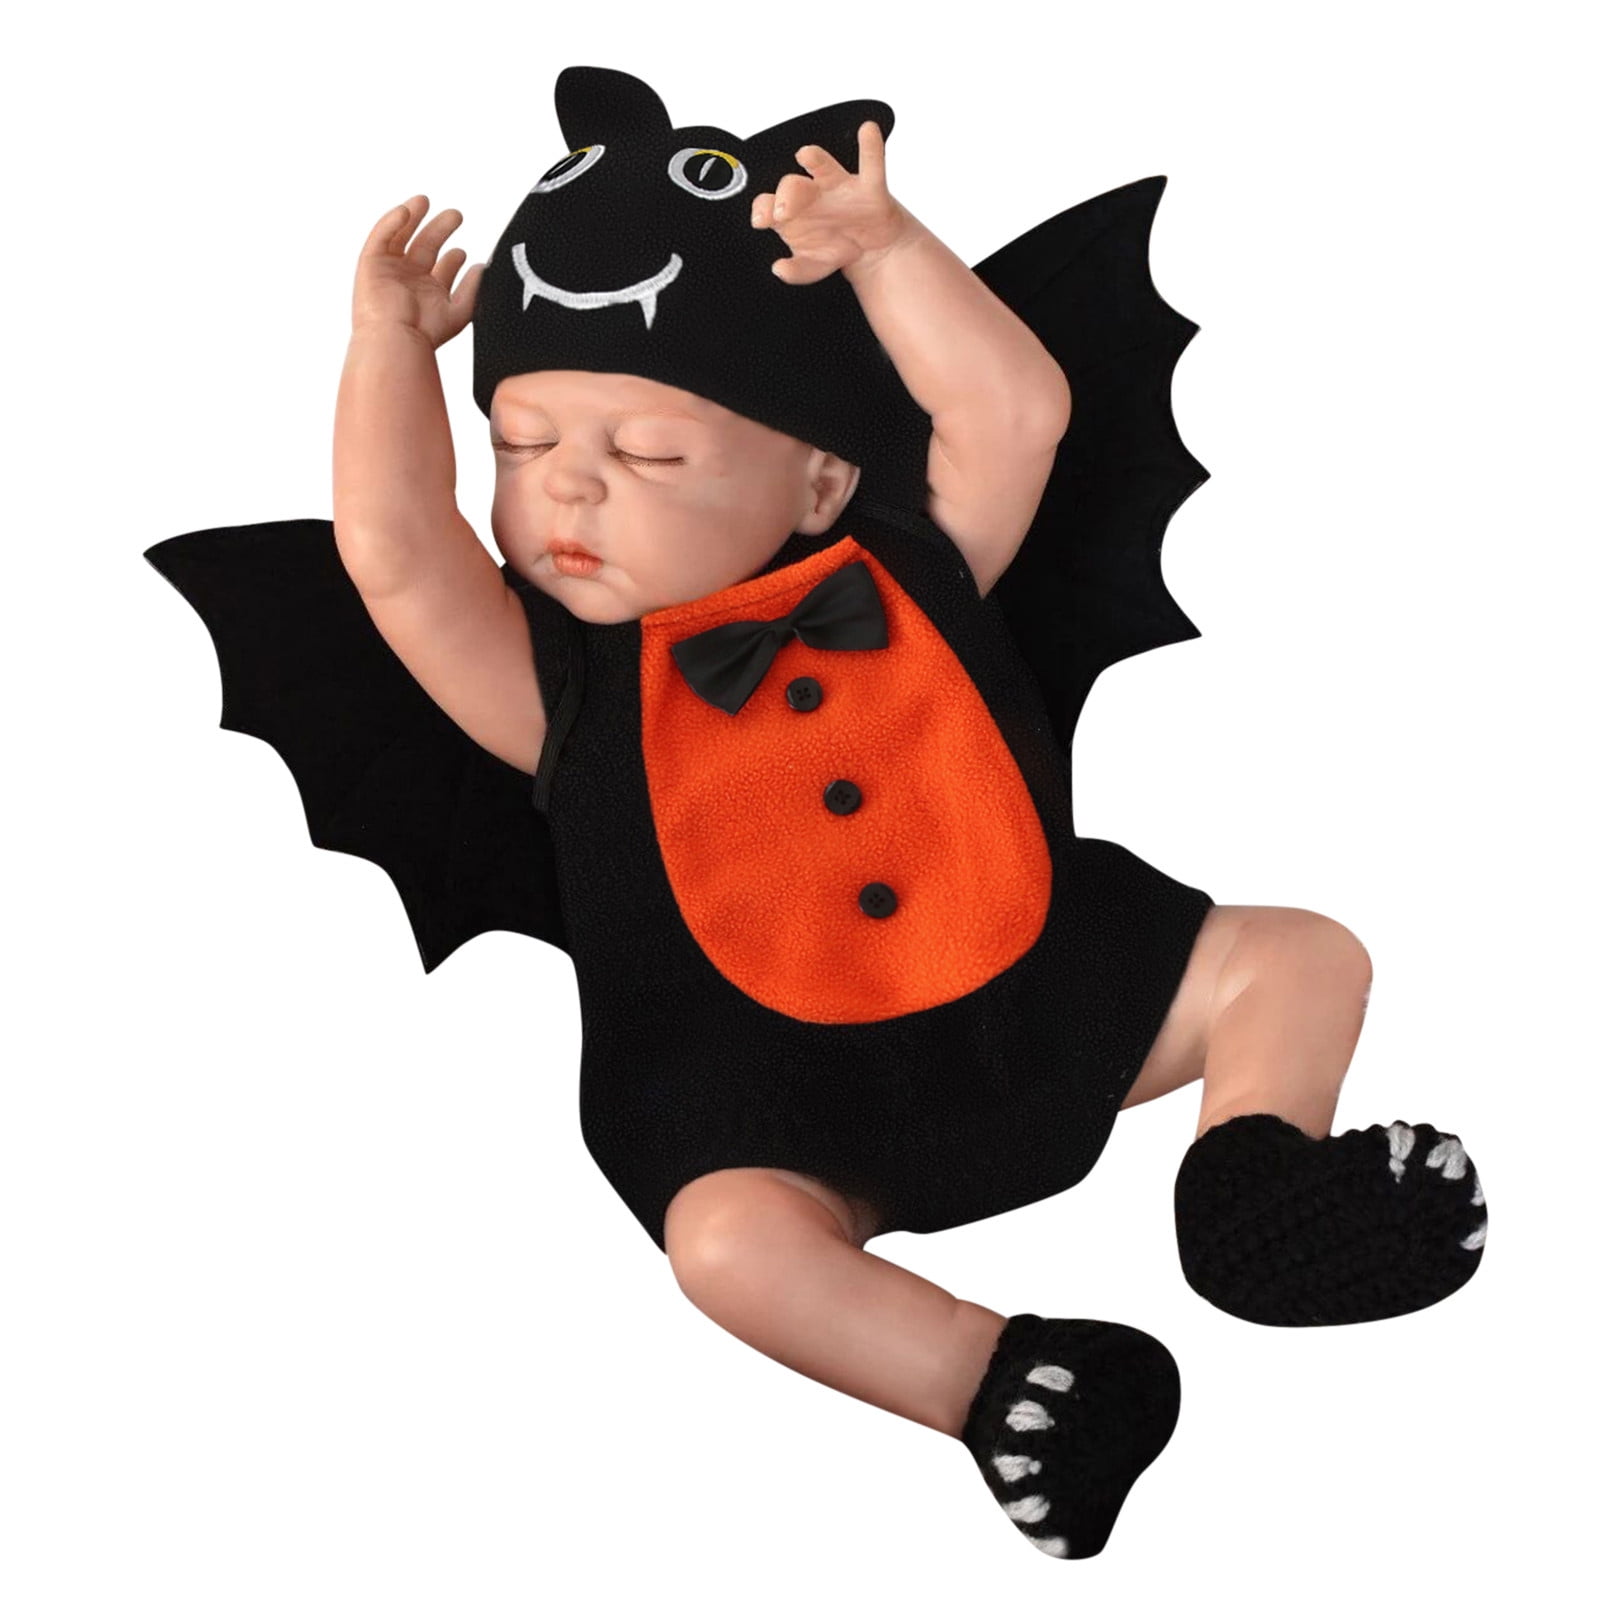 TAIAOJING Outfits For Girls Toddler Infant Baby Boys Halloween Bat Monster Soft Fleece Romper Jumpsuit Sets With Wing Hat 3PCS Set Costumes Girl Clothing 0-6 Months